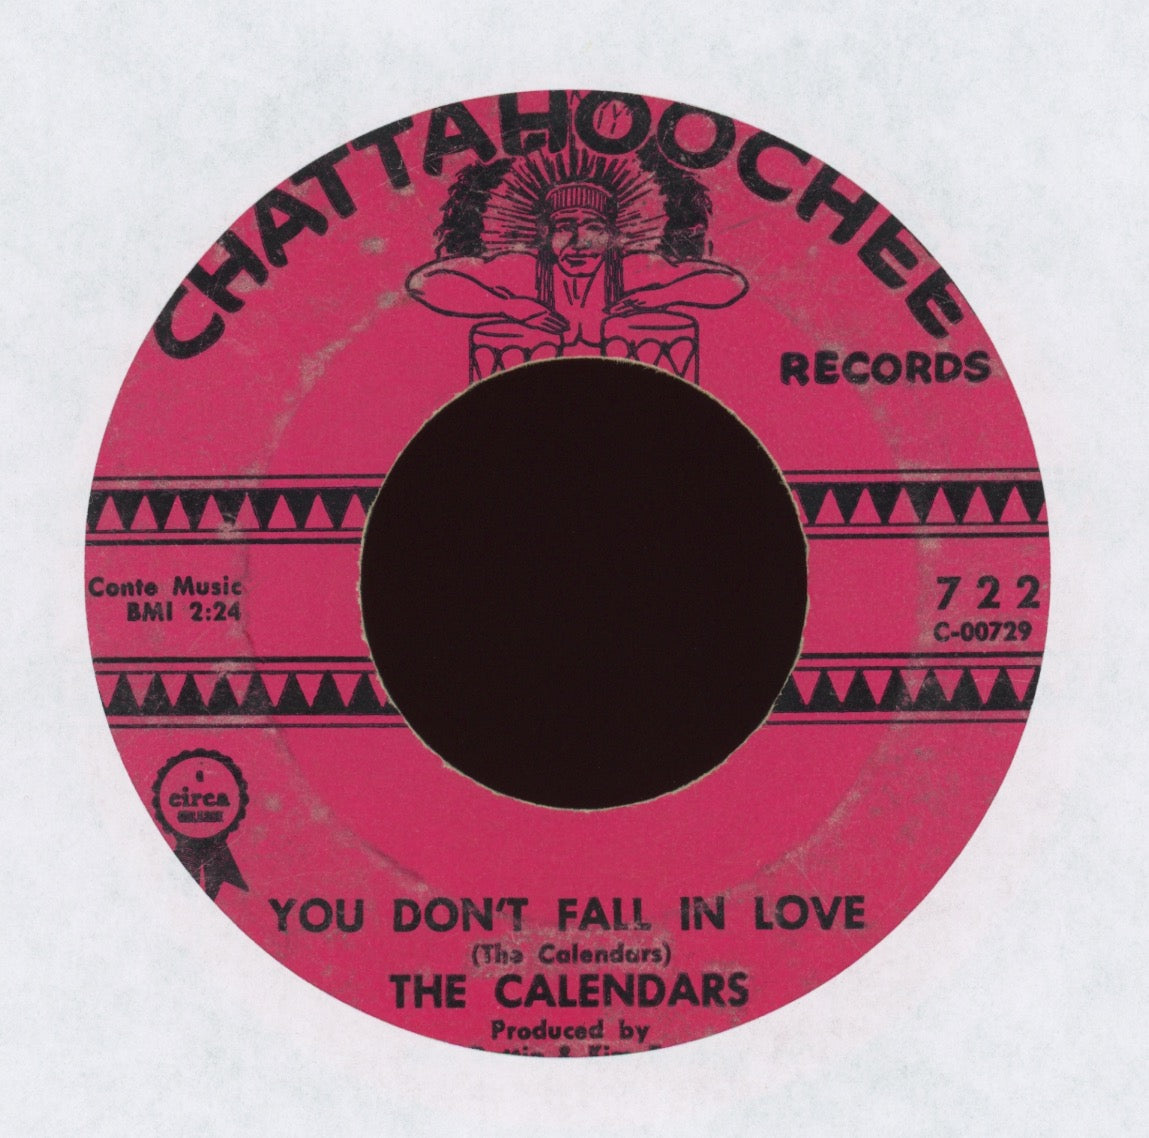 The Calendars - You Don't Fall In Love on Chattahoochee